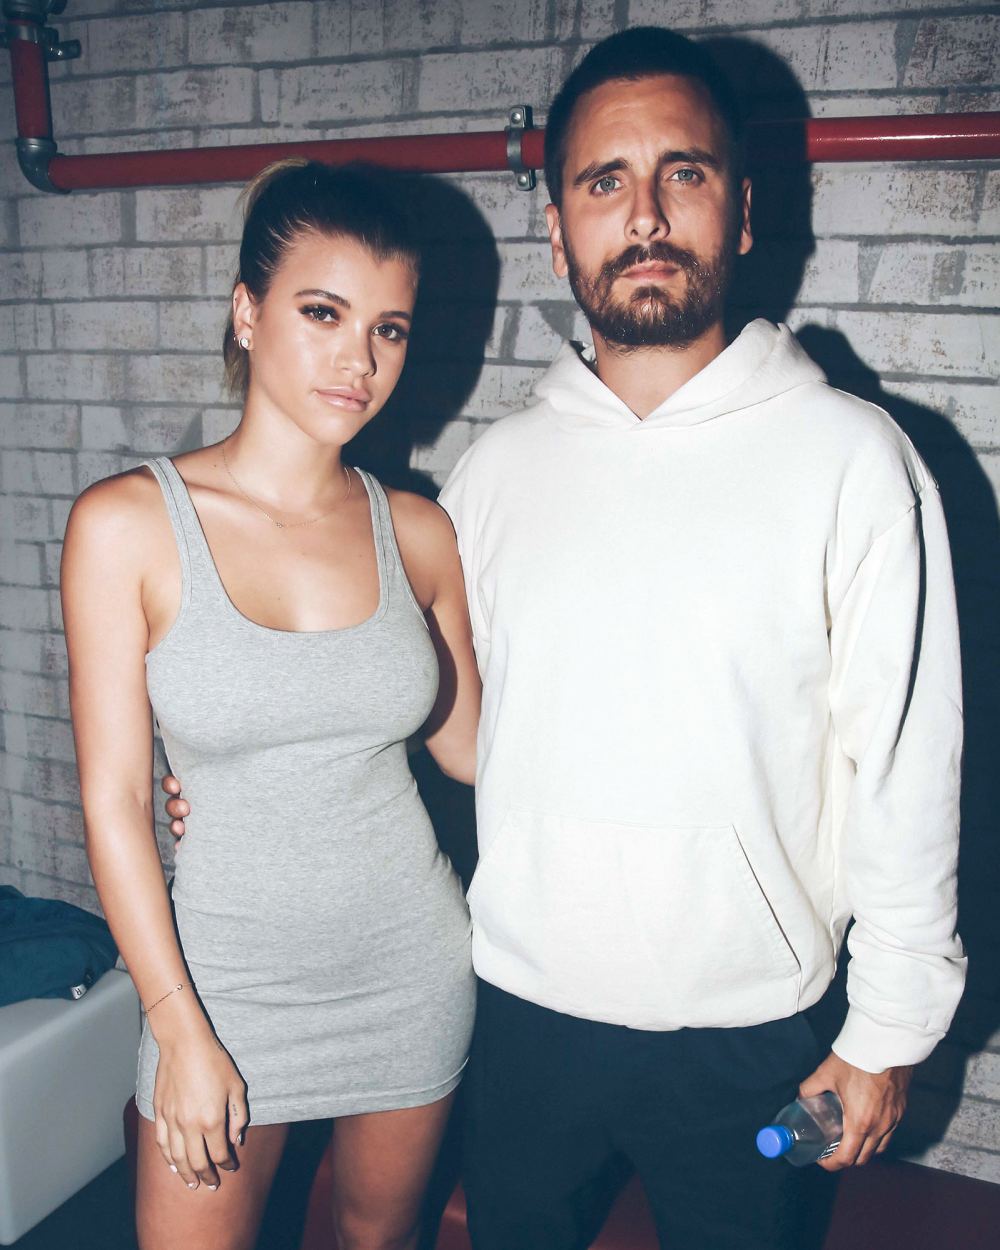 Sofia Richie and Scott Disick Transform Into Vintage Barbie and Ken for Halloween